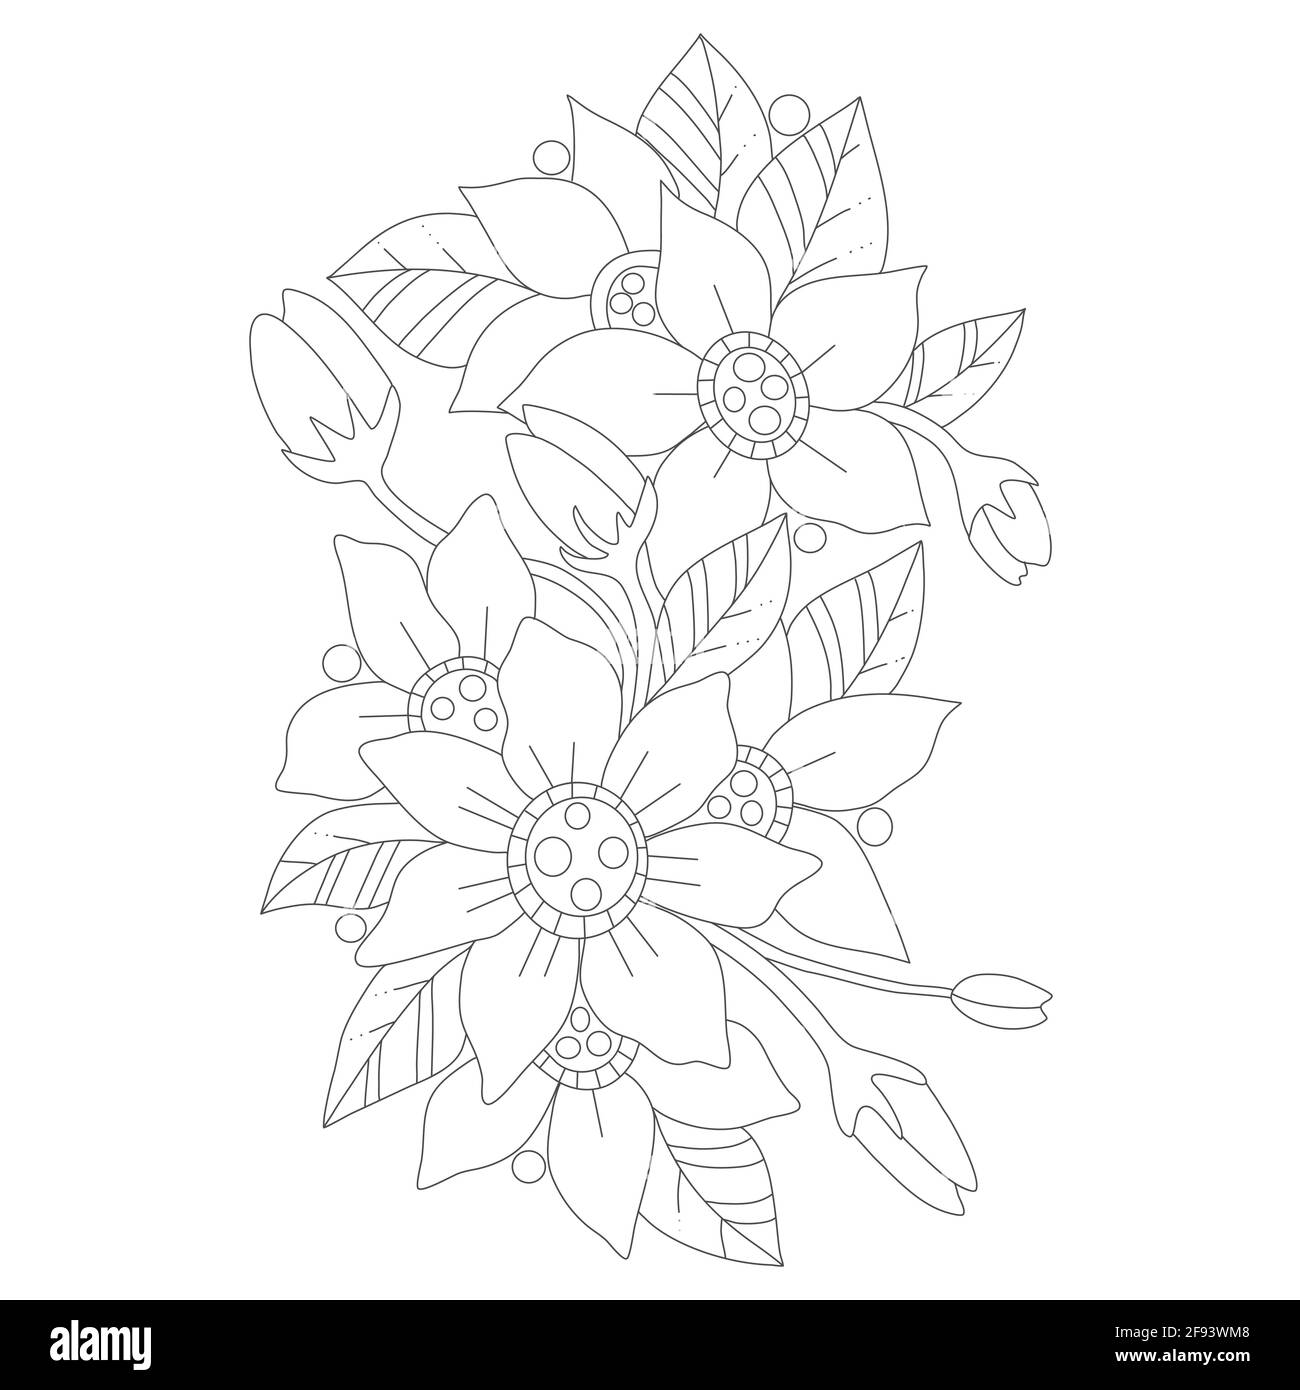 Outline doodle bohemian flowers in black and white for adult coloring books, monocrome floral vector pattern. Stock Vector